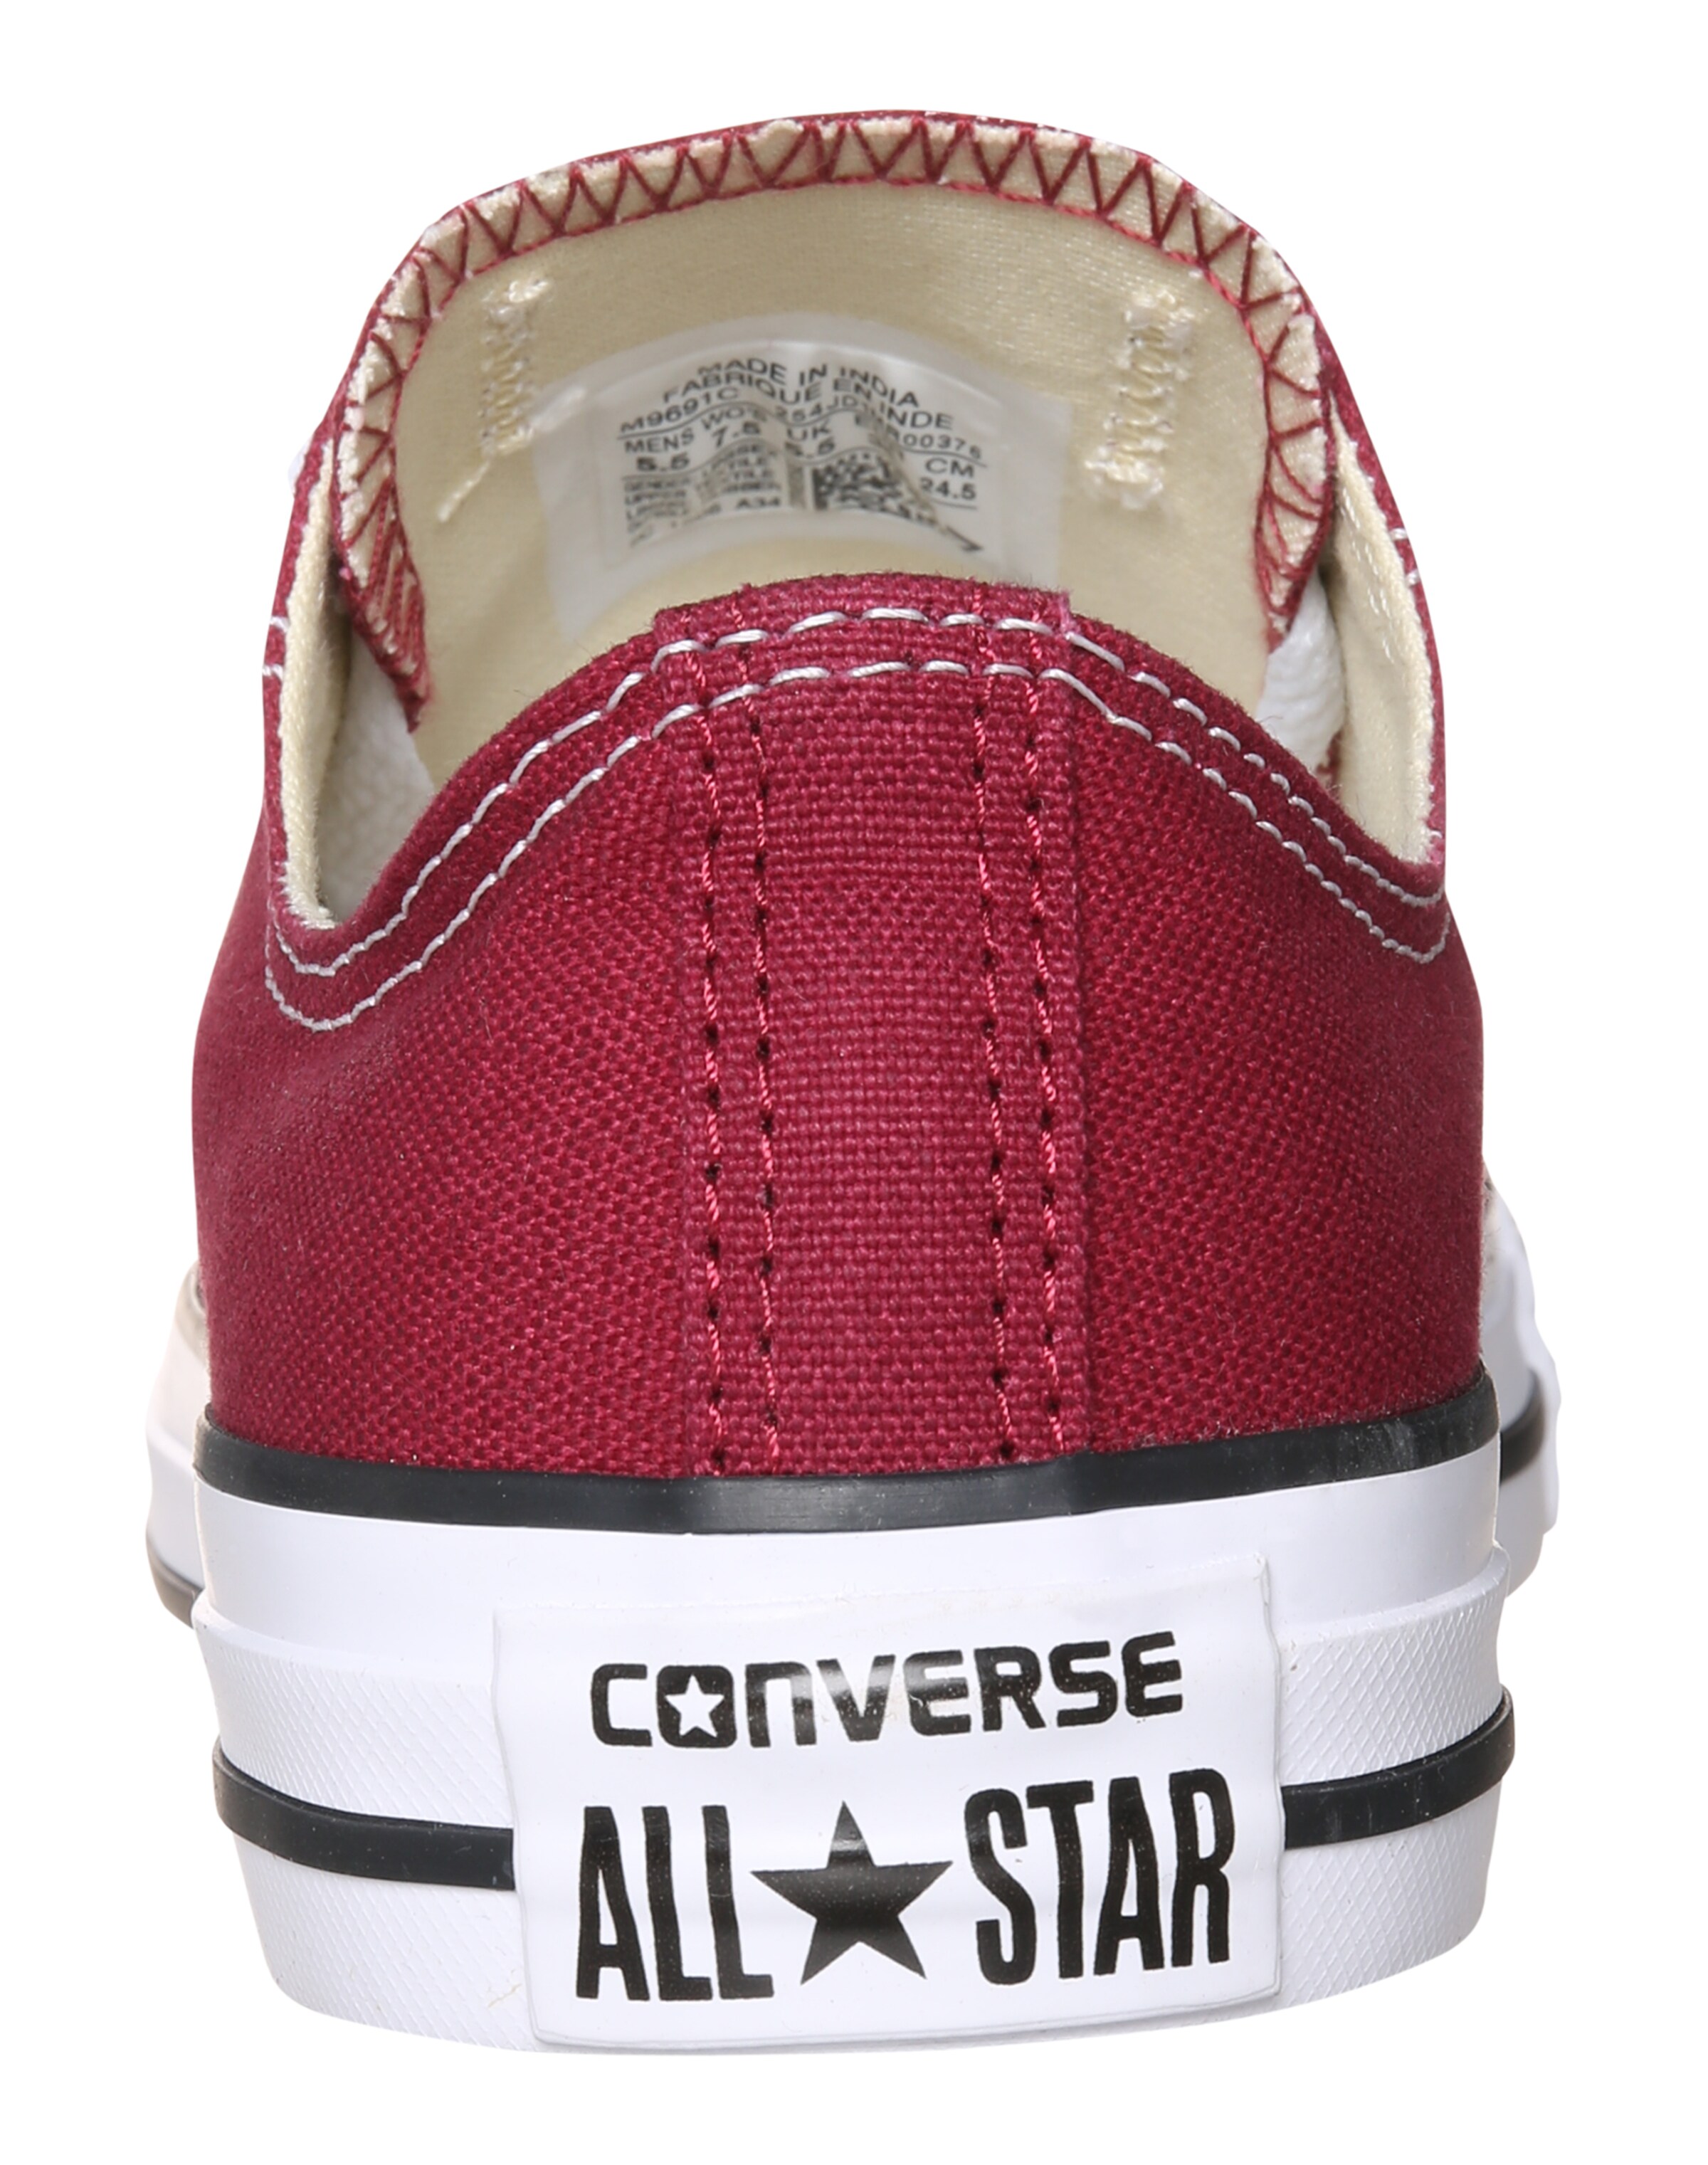 Sneakers Baskets basses Chuck Taylor All Star Ox CONVERSE en Rouge Cerise 